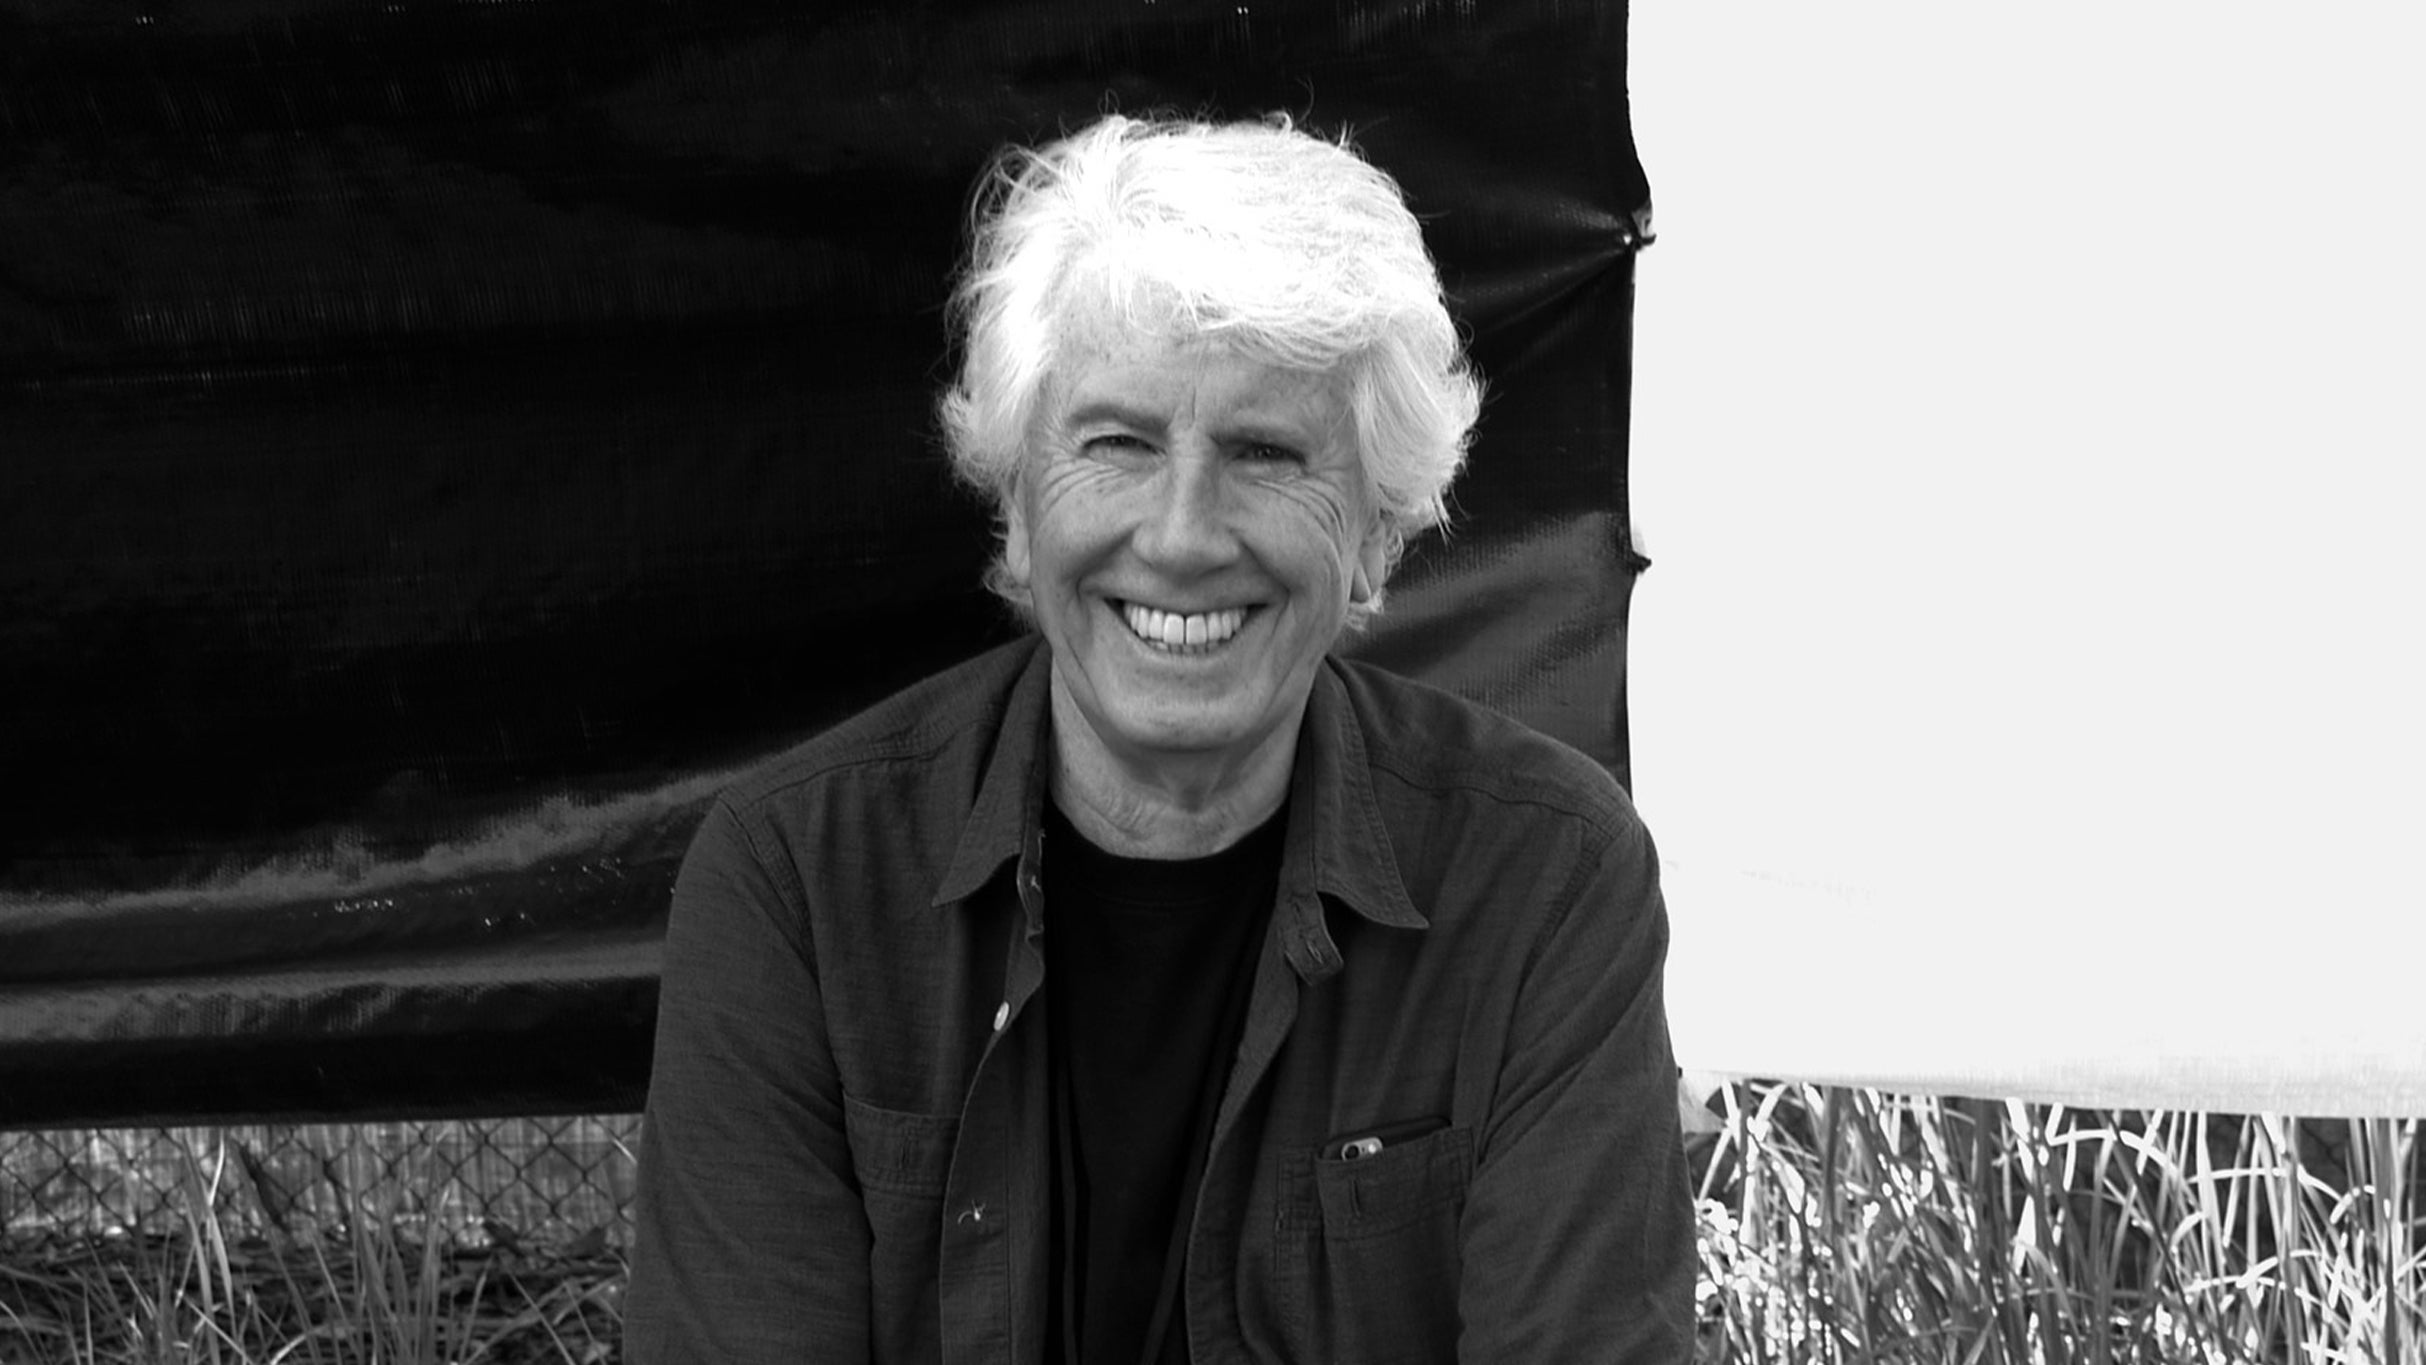 Graham Nash free presale c0de for early tickets in Minneapolis